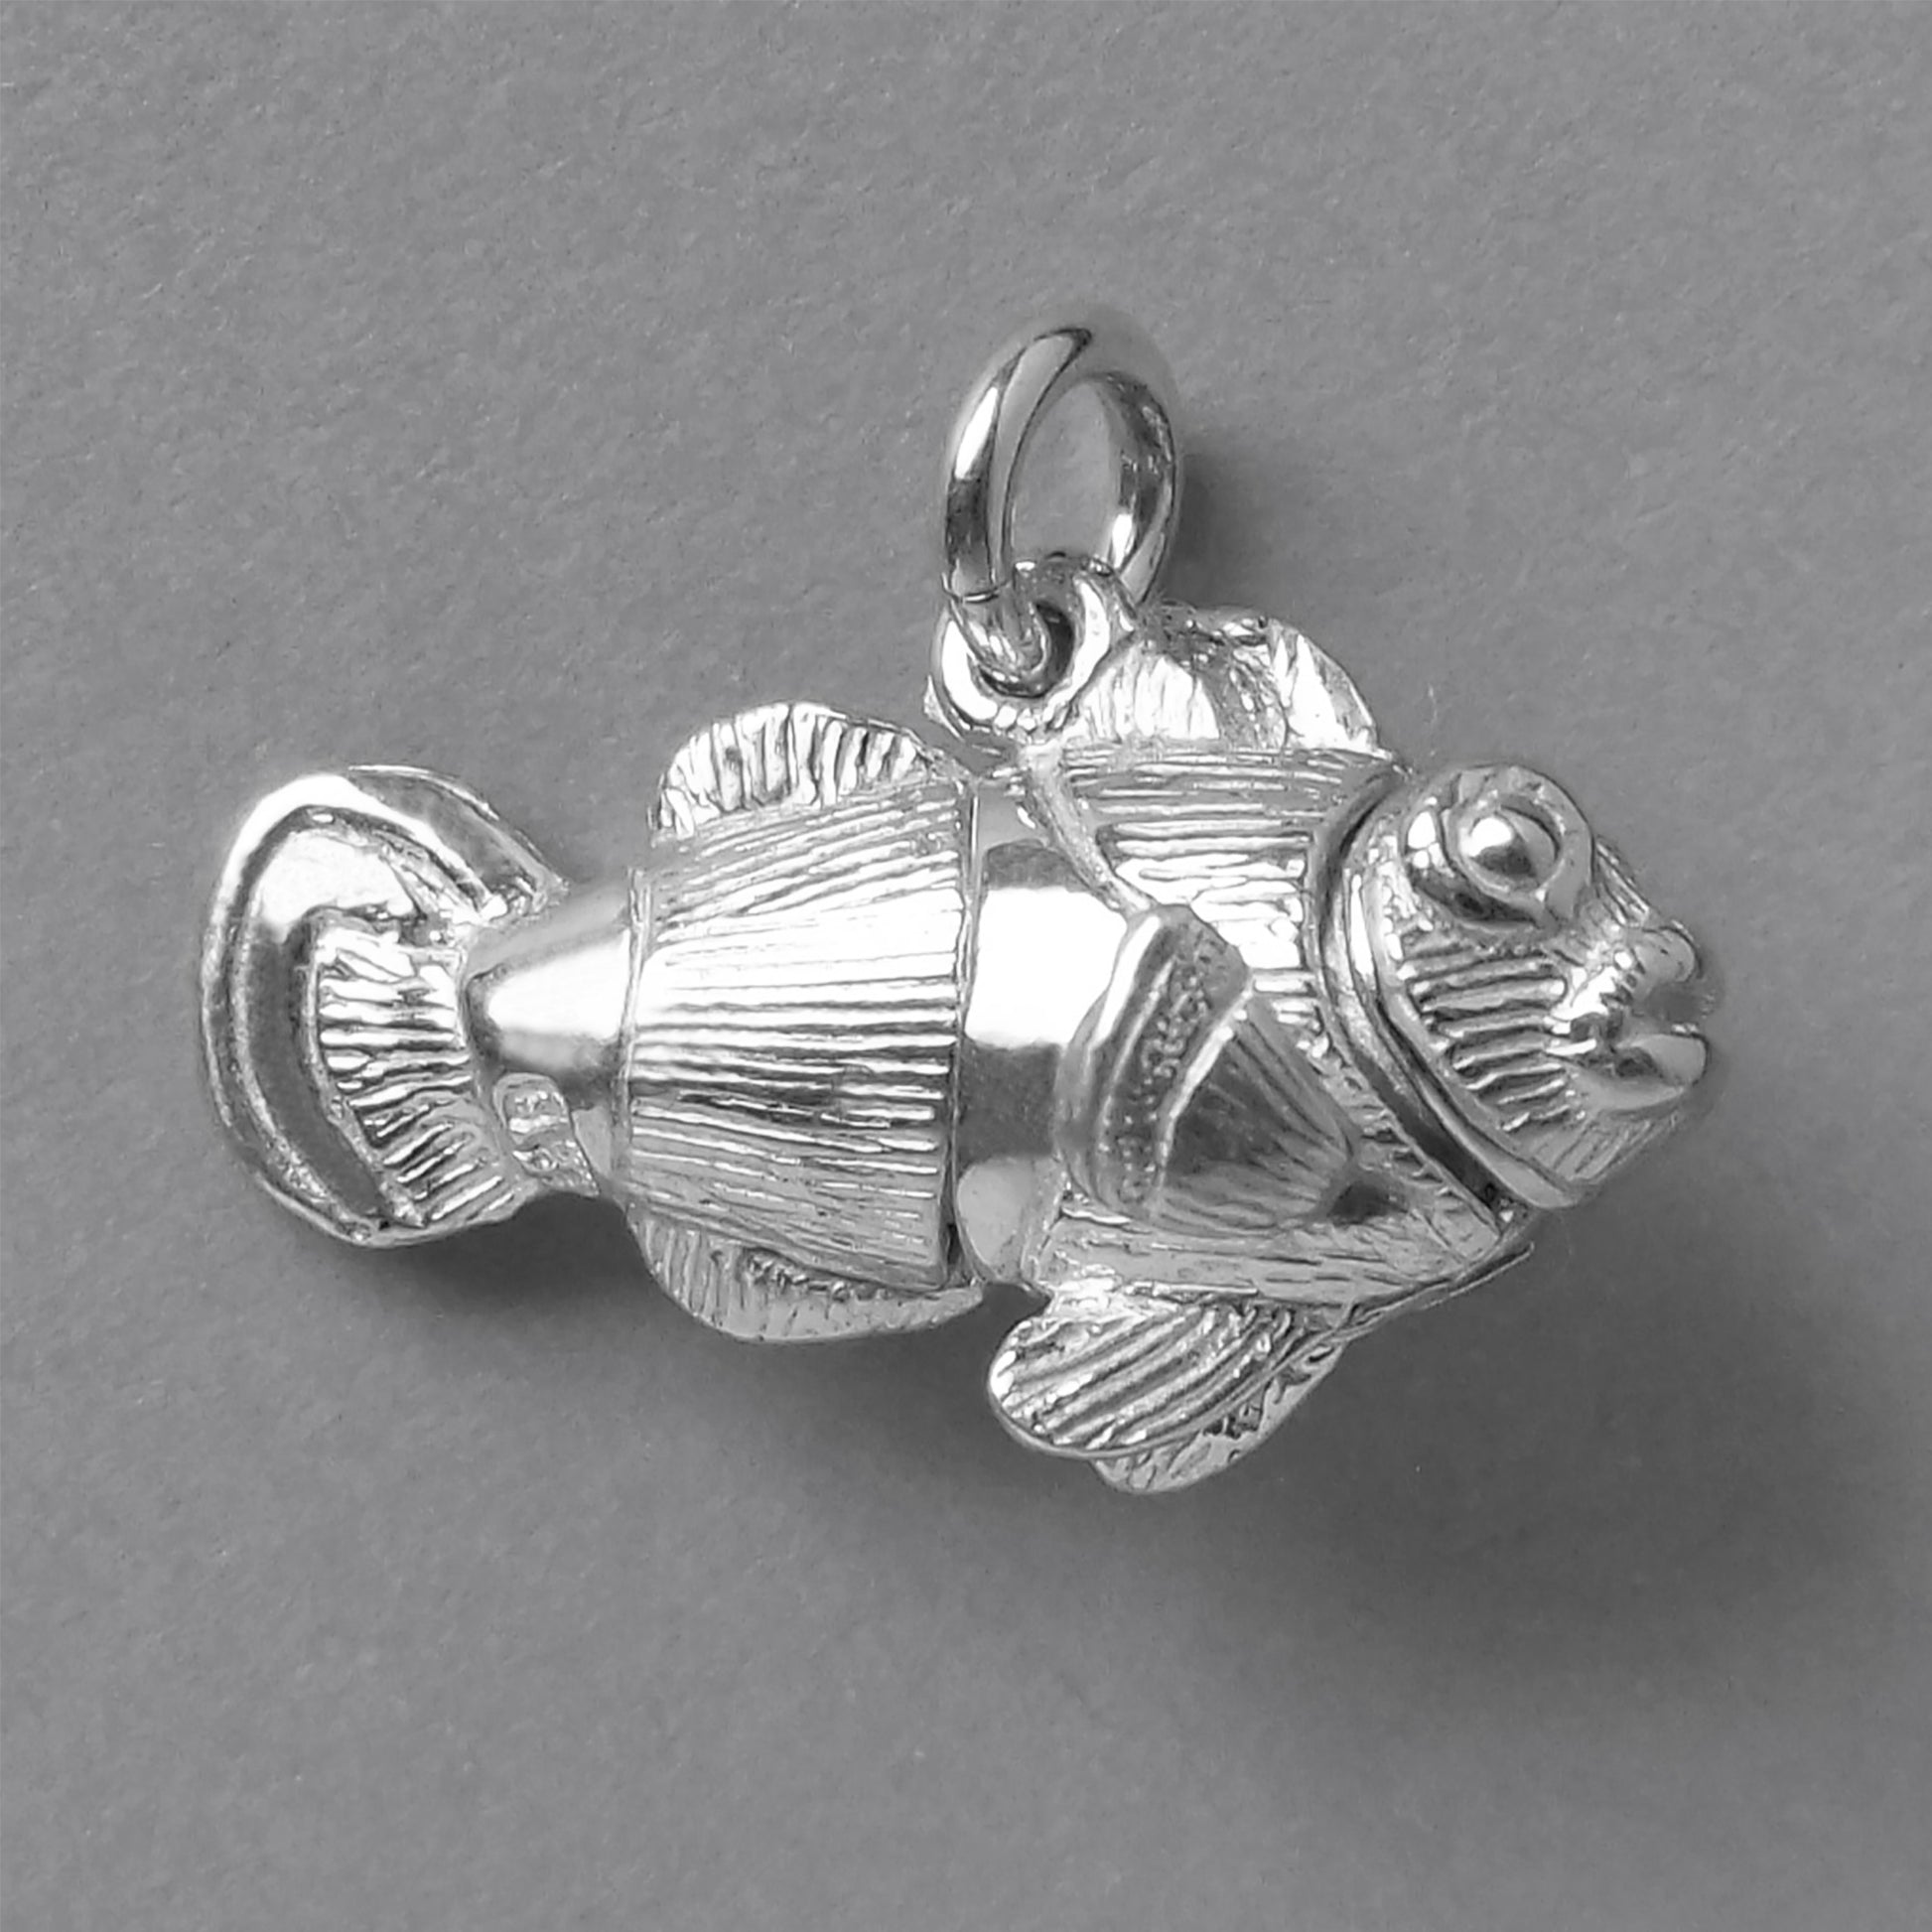 clownfish charm — made to order